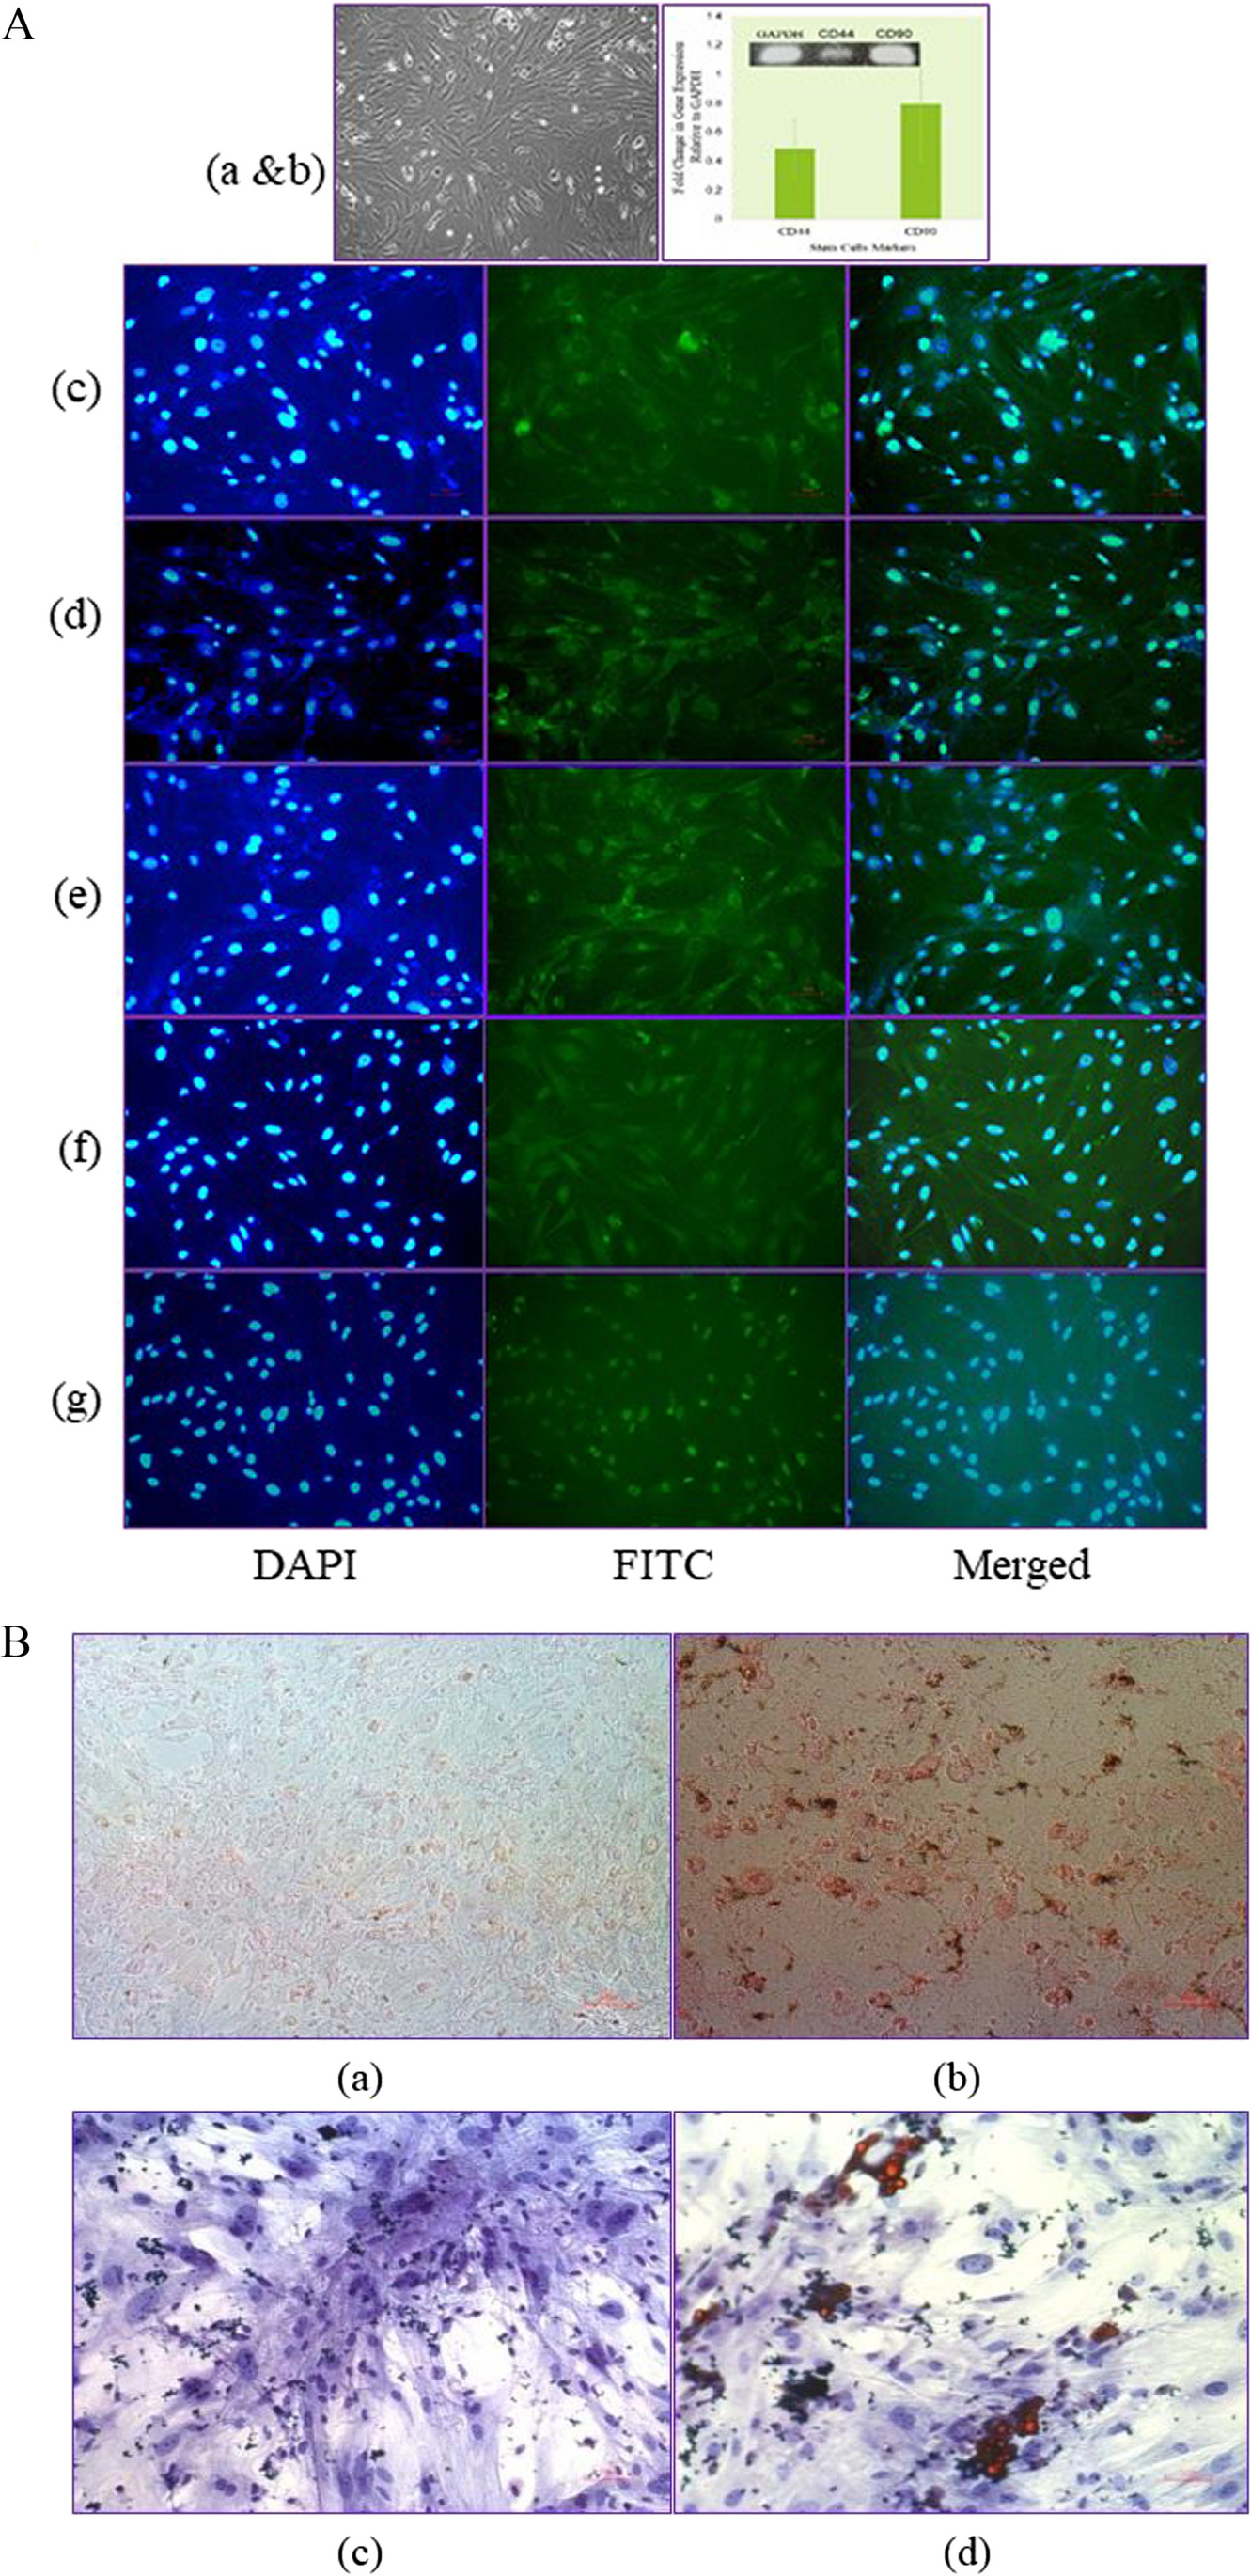 Bioengineering Renal Epithelial-Like Cells from Mesenchymal Stem Cells by Combinations of Growth Factors and Small Molecules